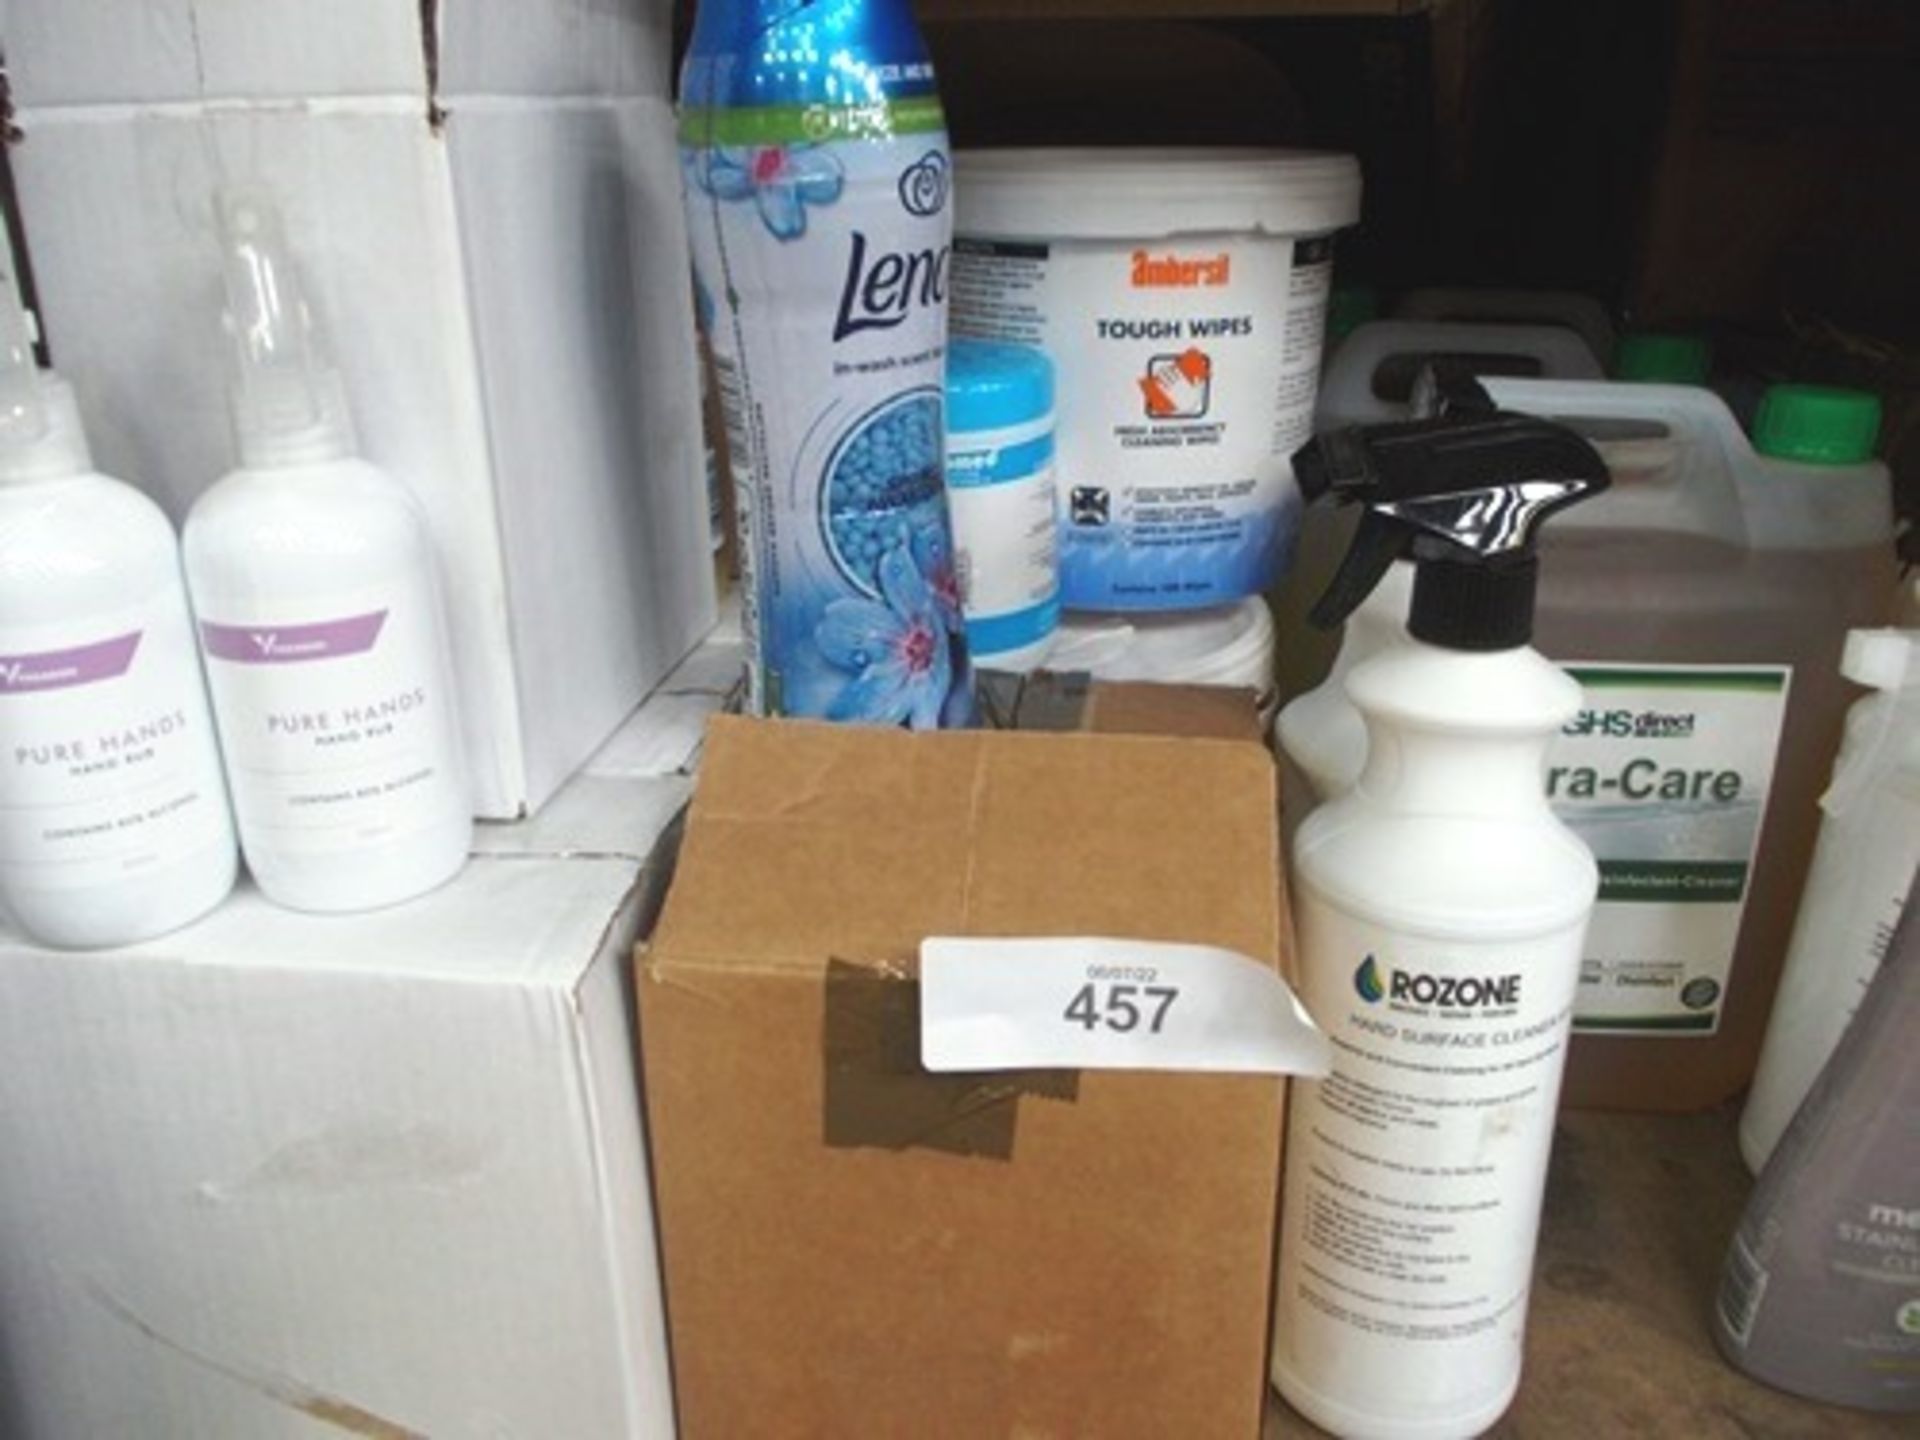 A selection of cleaning products including hard surface cleaner, bacterial liquid soap, non-bio